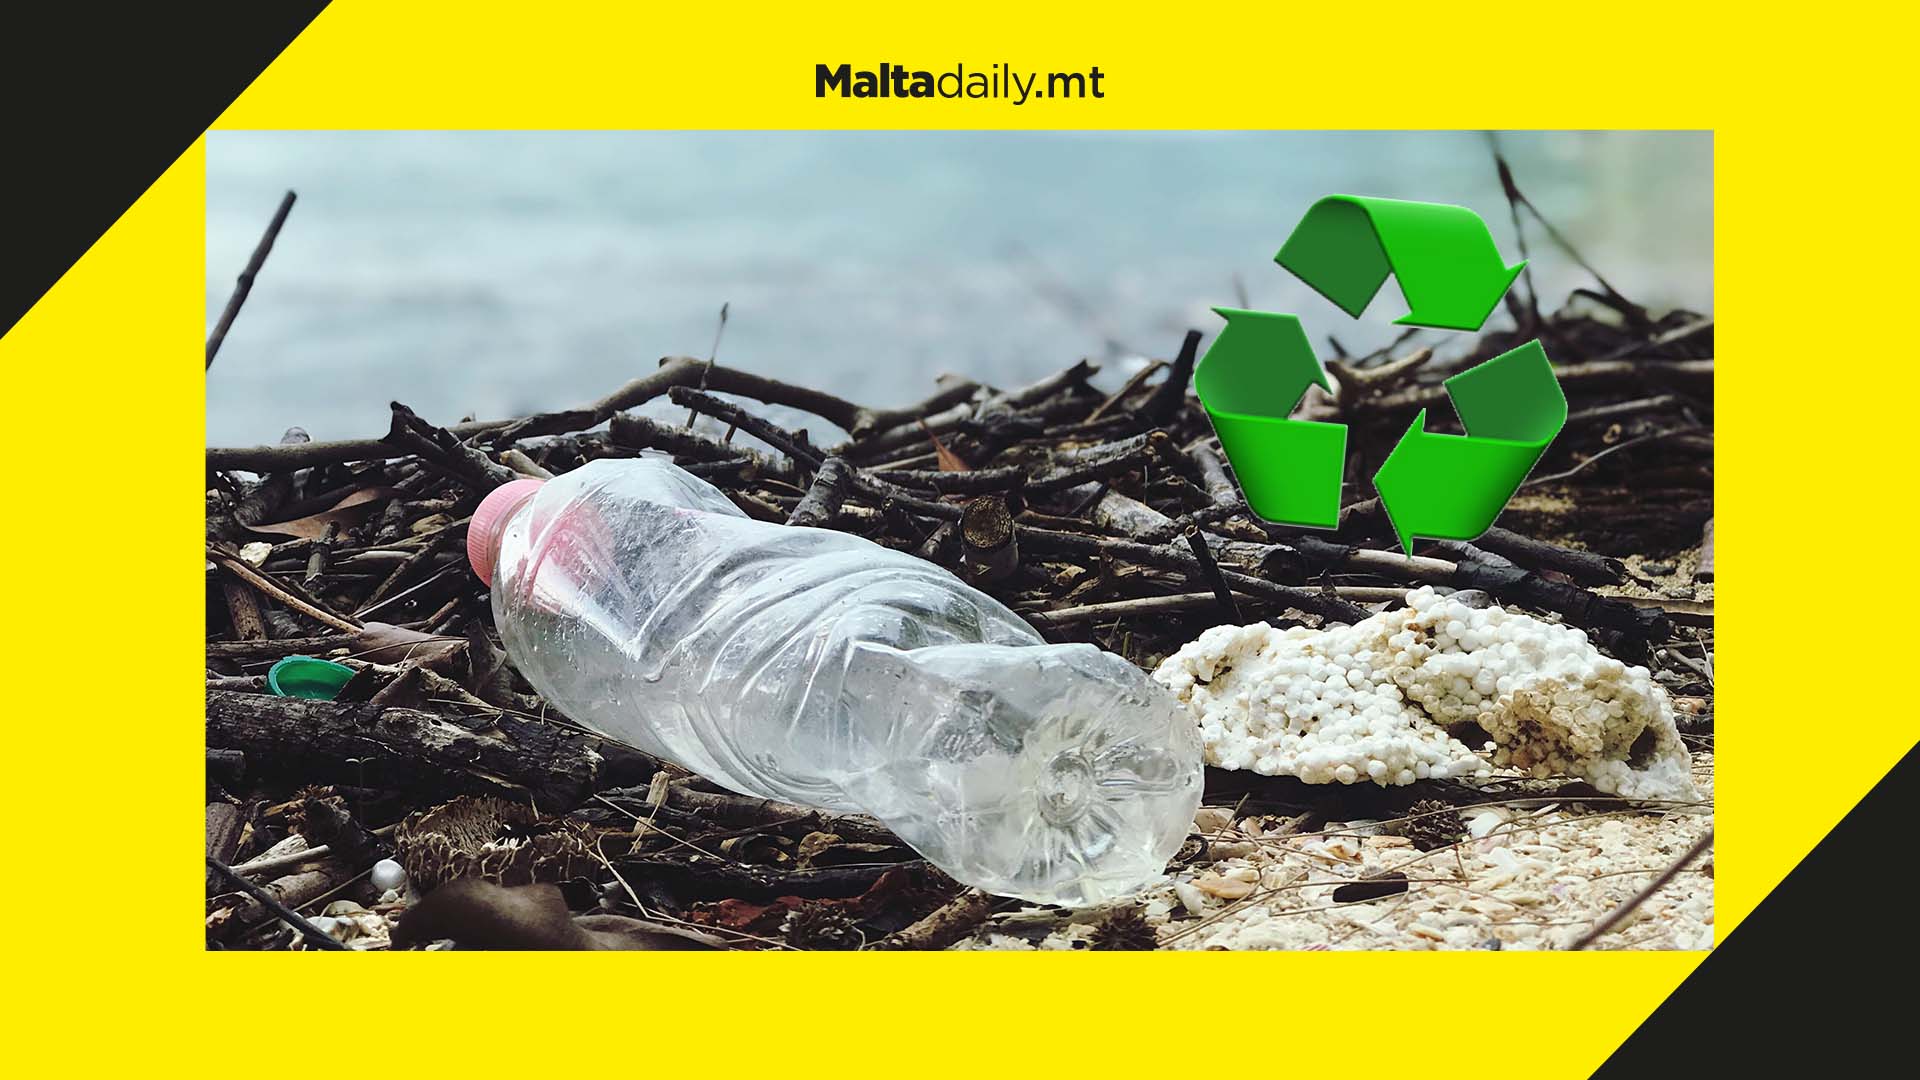 Engineers develop 'super recycling' enzyme which breaks down plastic in hours